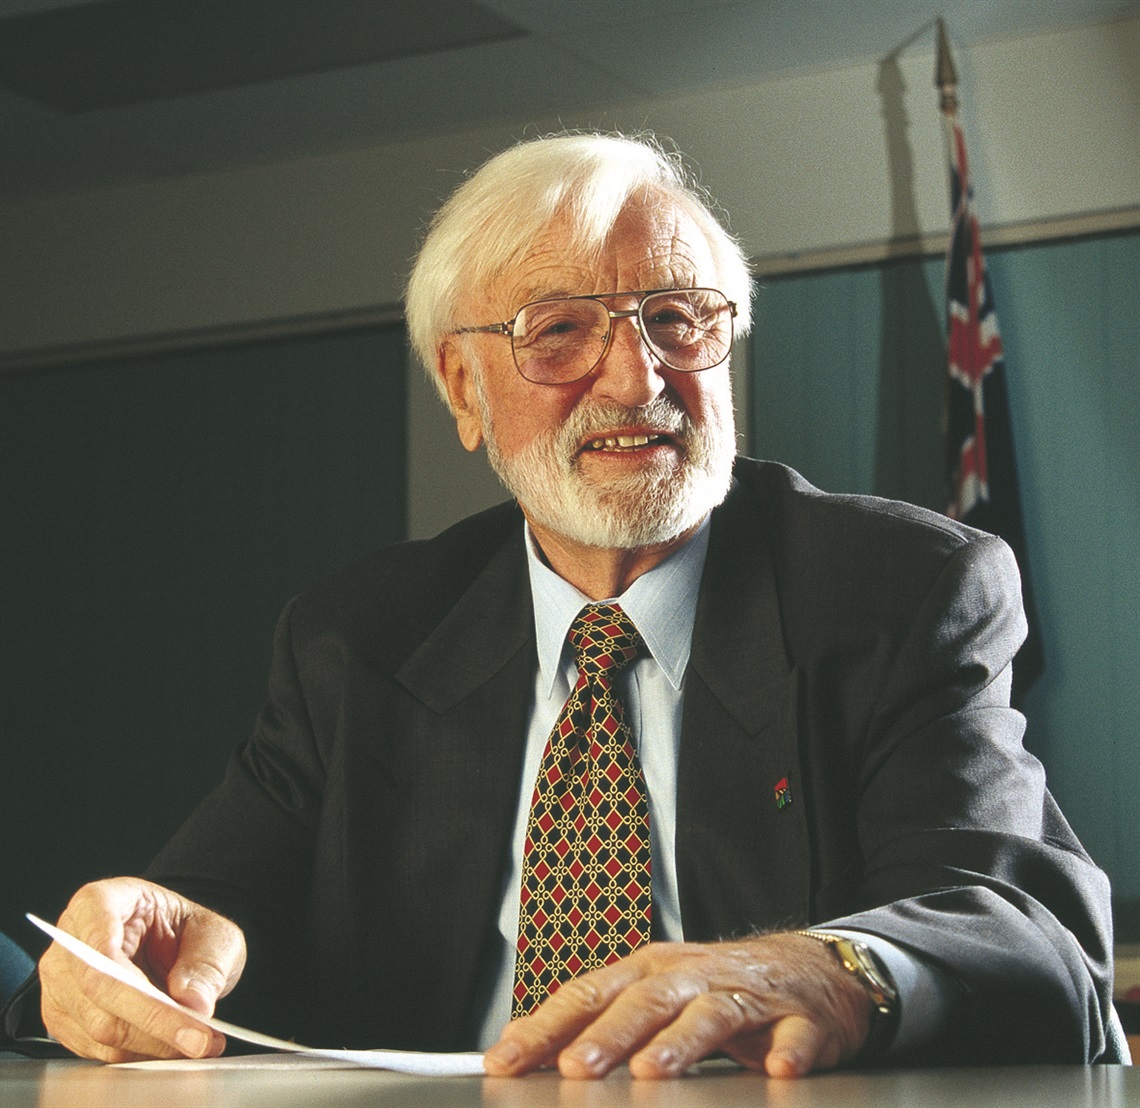 Ray had a long and illustrious 34-year career in local government.